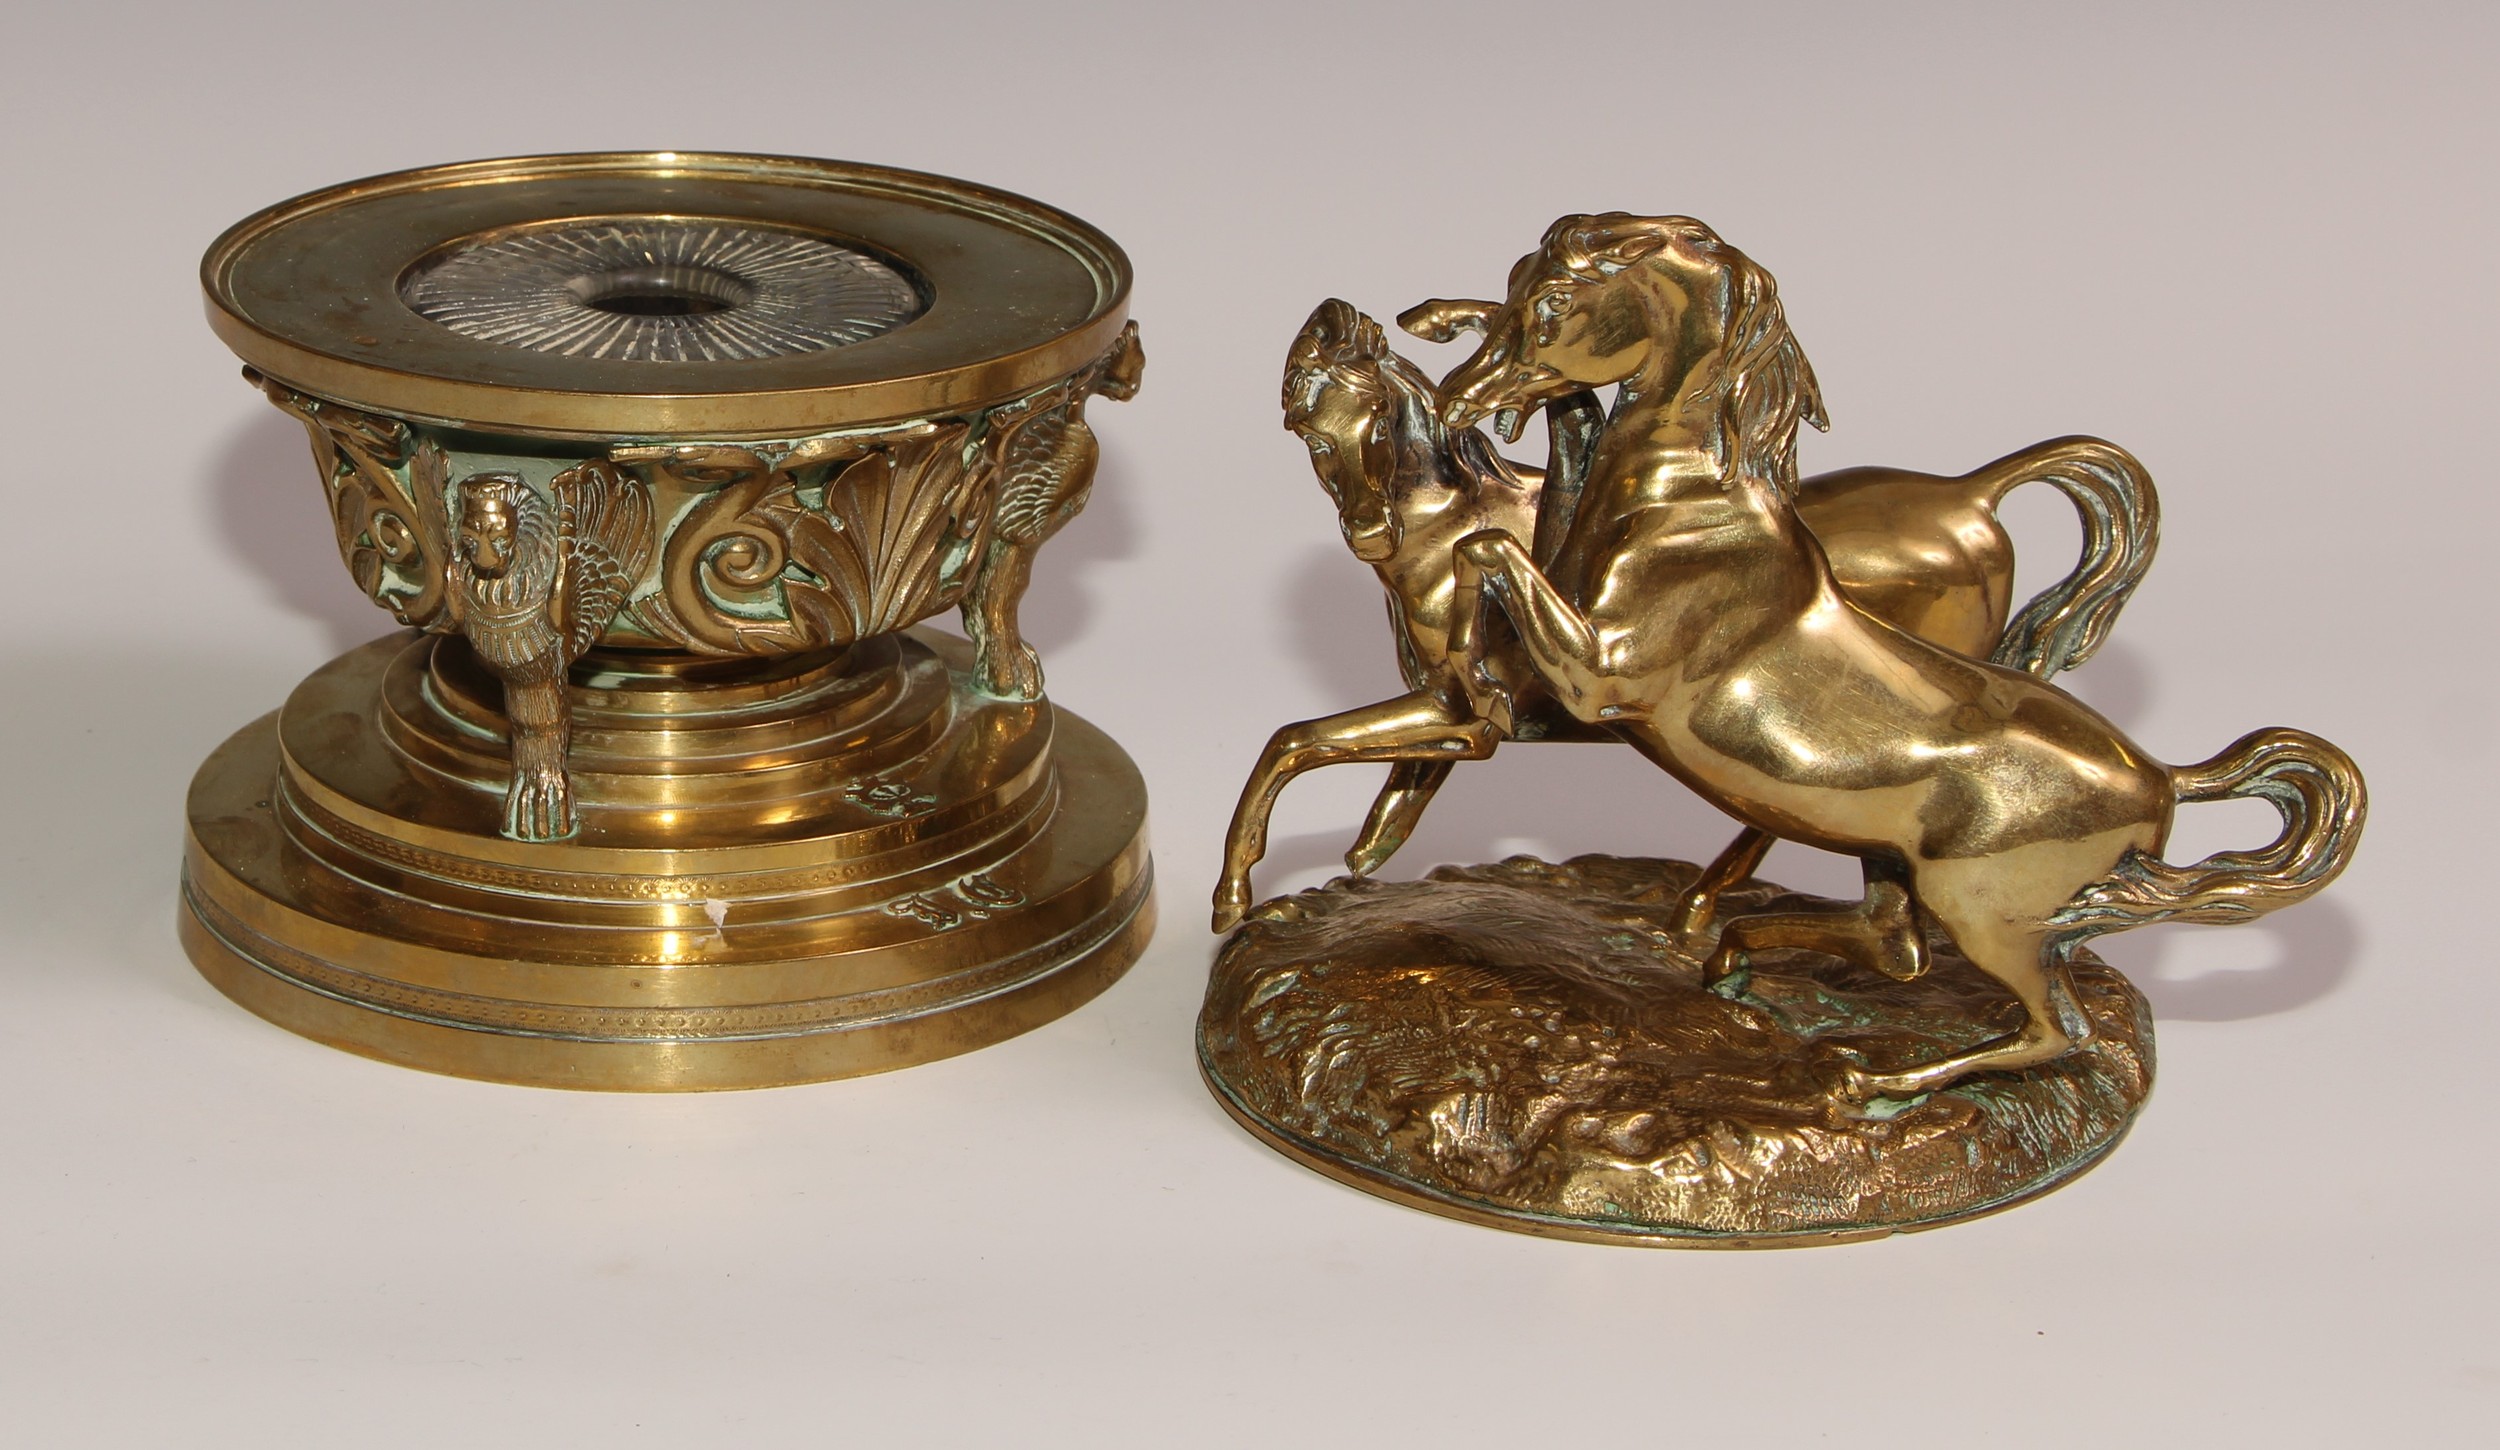 A substantial sculptural 19th century French bronze inkwell, the cover cast with a pair horses - Image 3 of 5